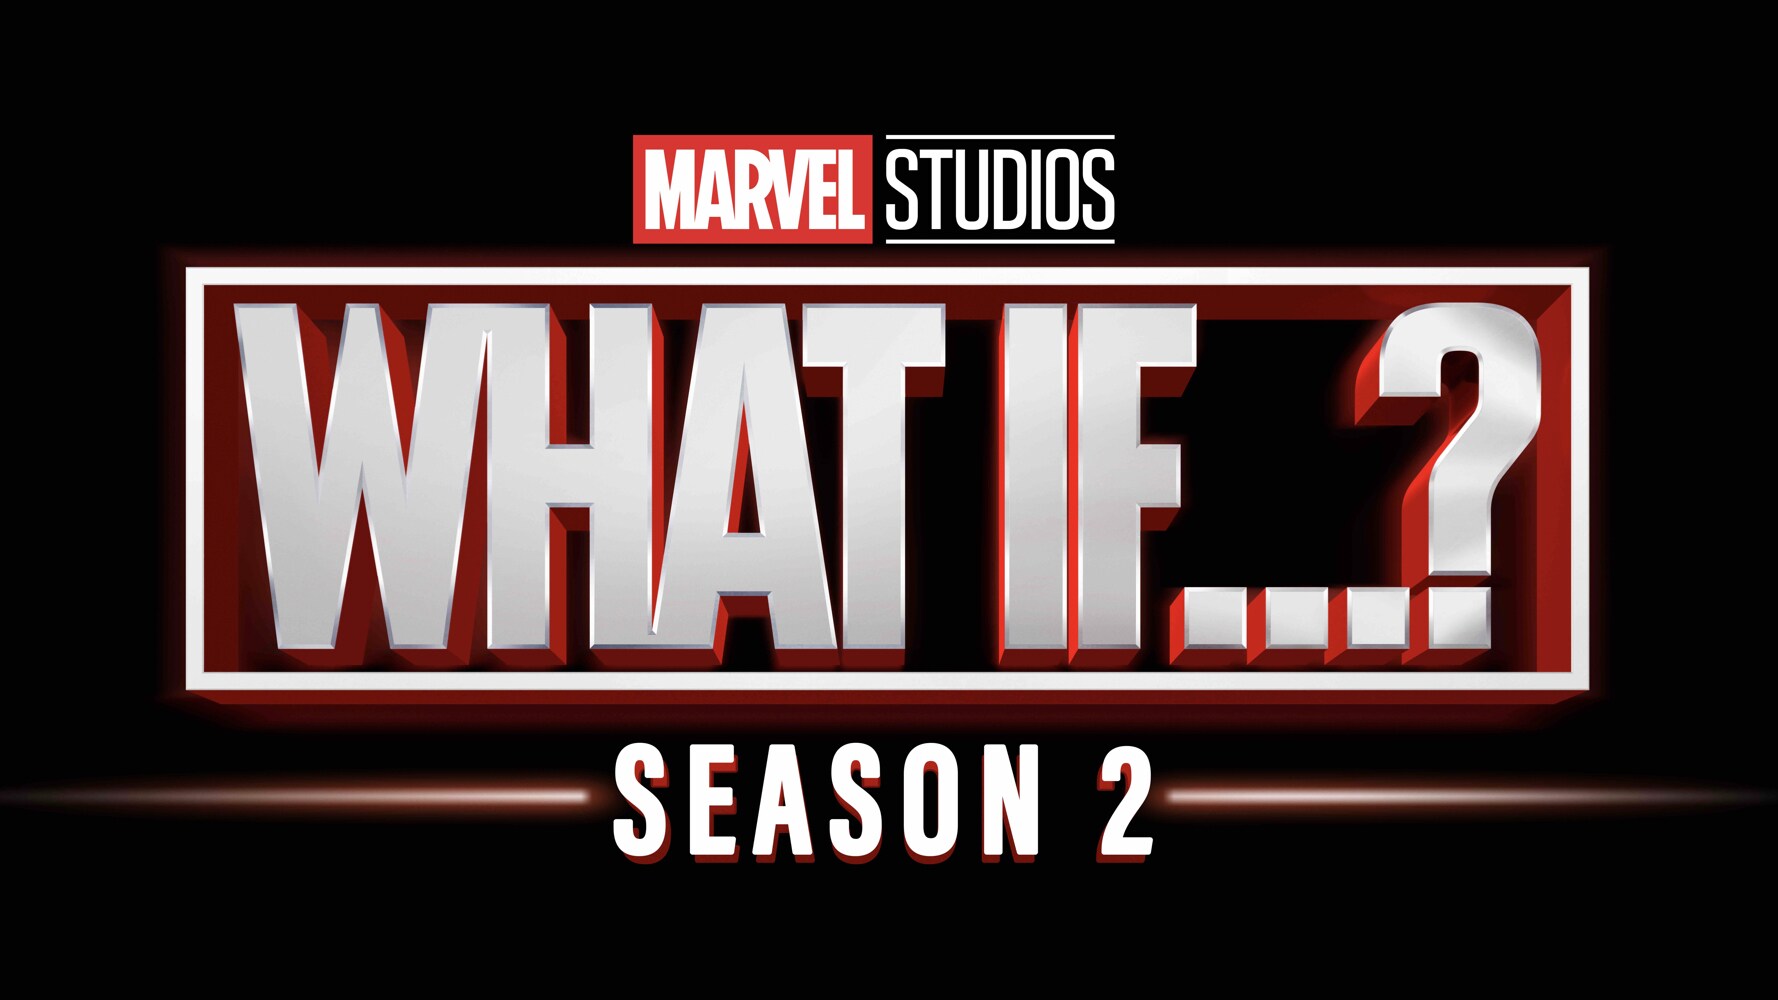 Marvel Studios’ Animated Series “What If…?” Now Streaming